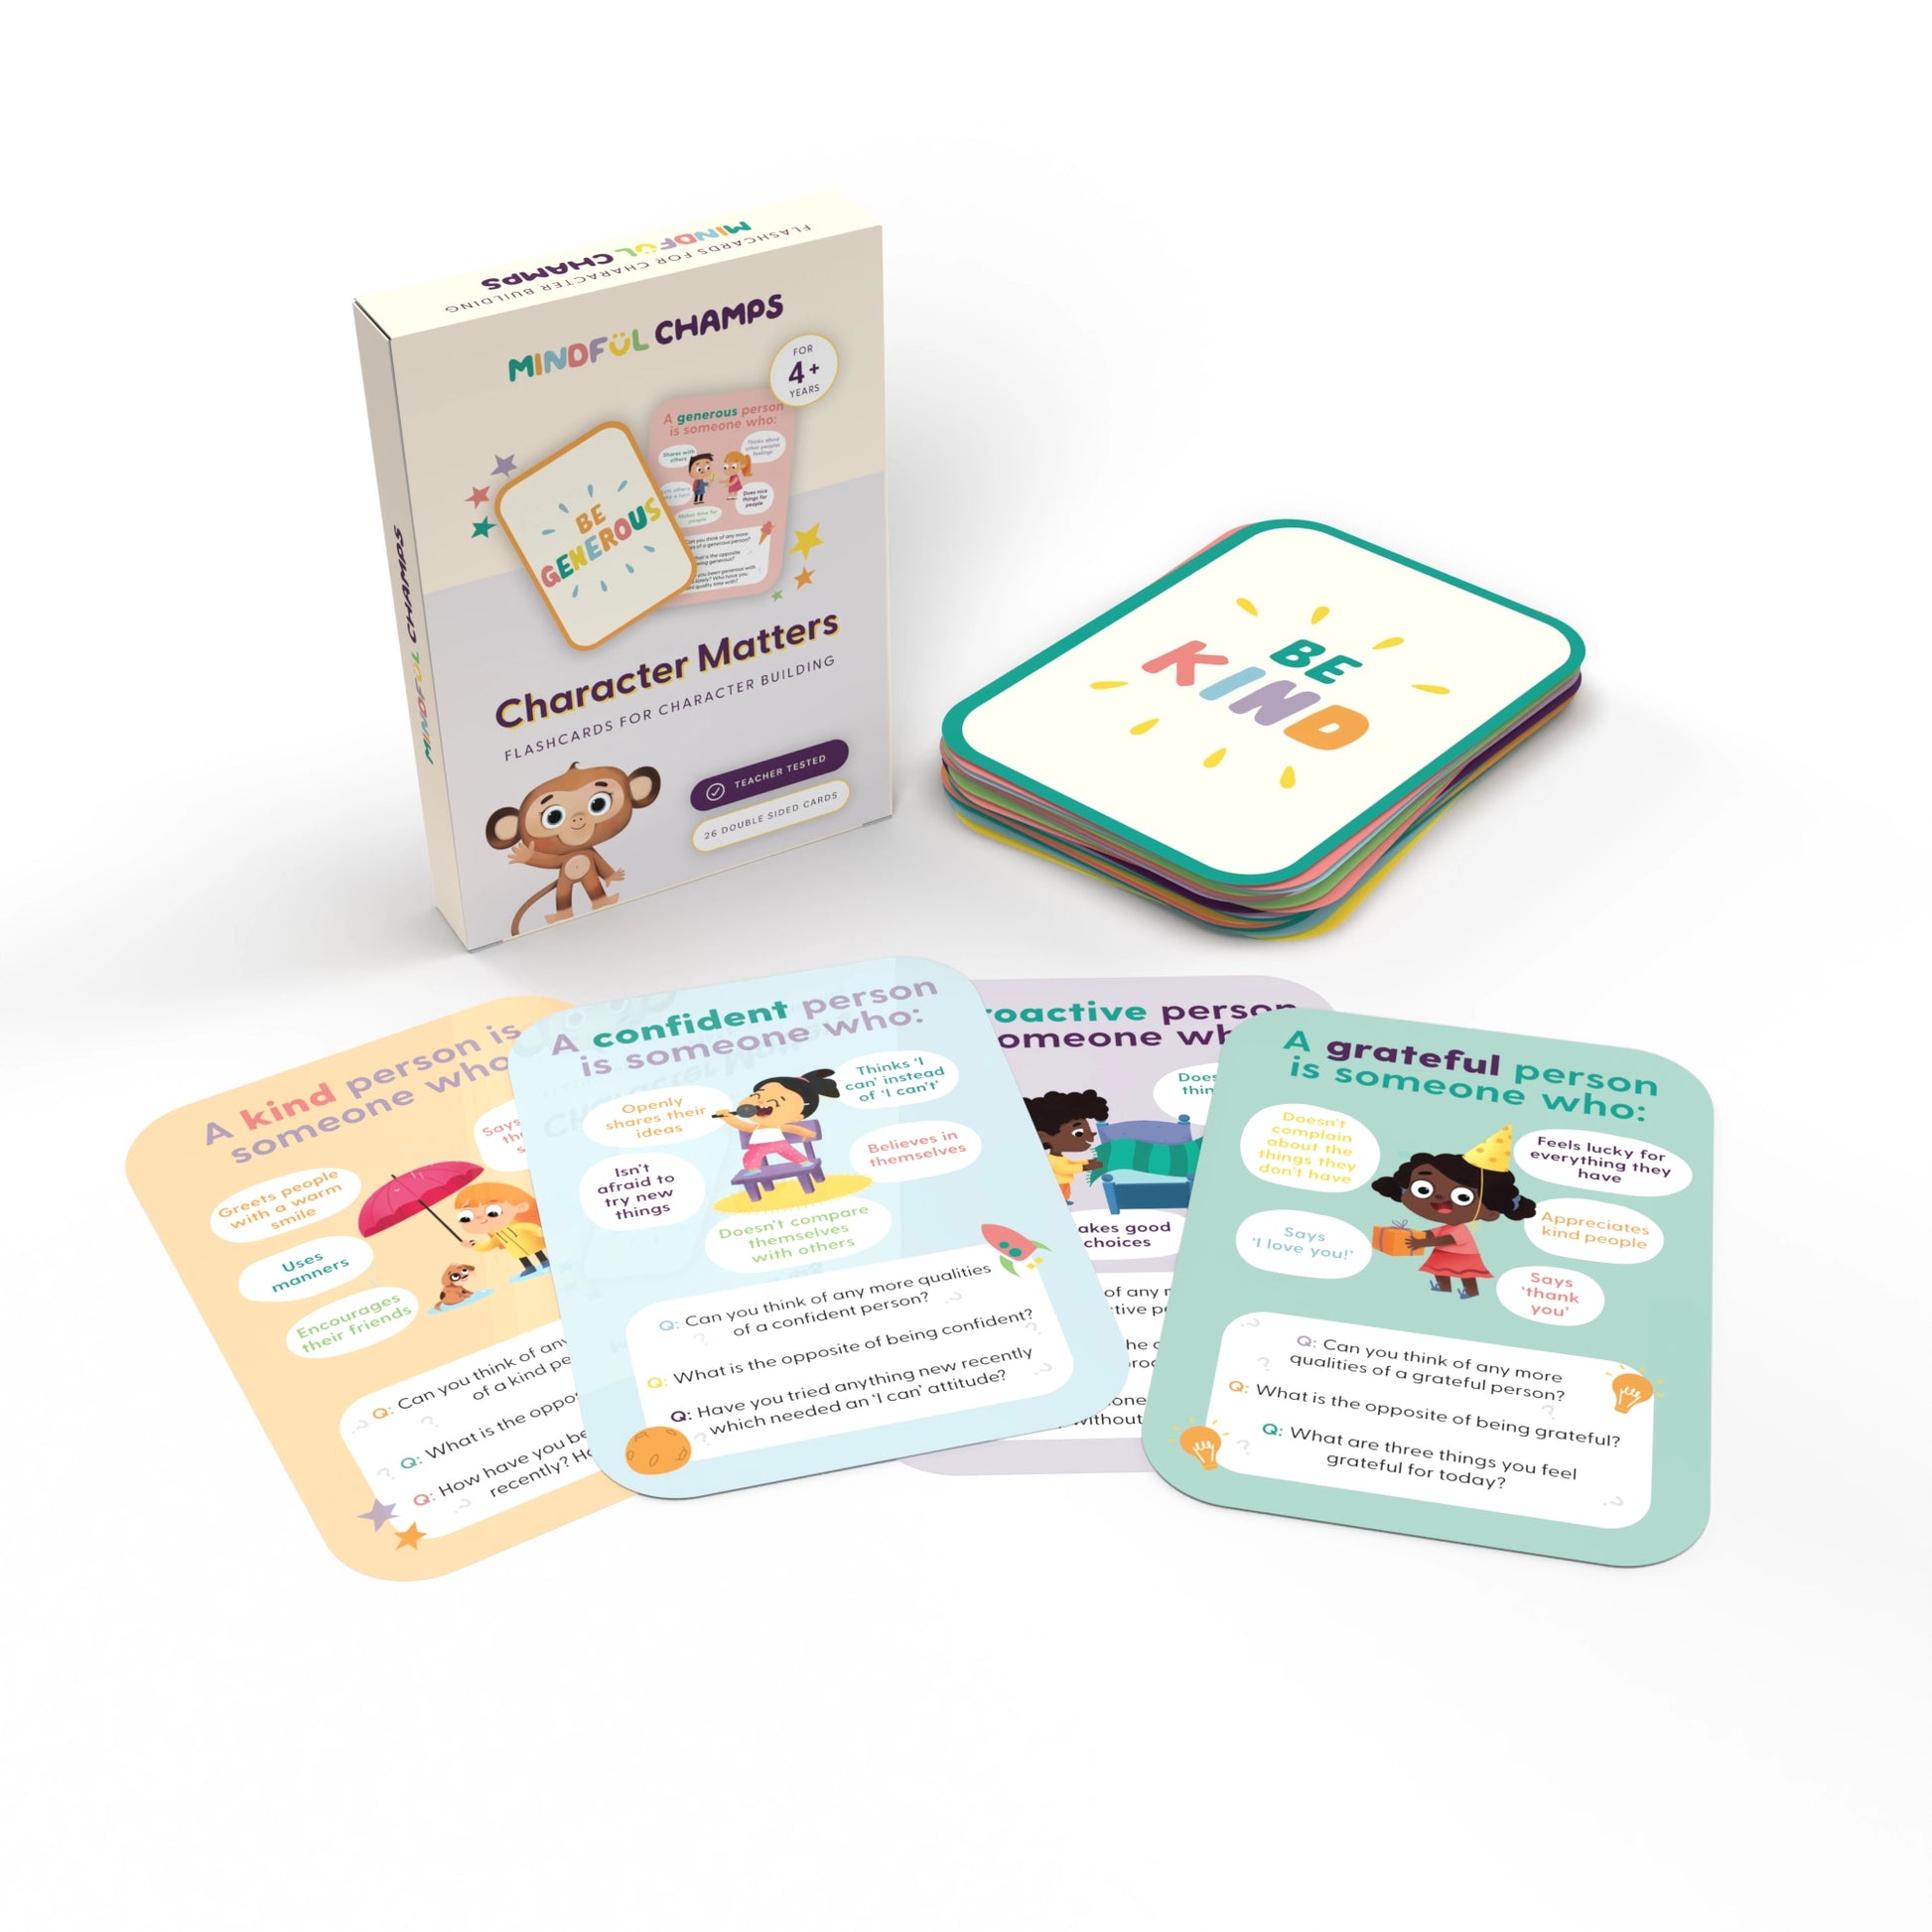 Character Matters Flashcards for Kids by Mindful Champs. Pack of children flashcards for understanding and developing character traits.